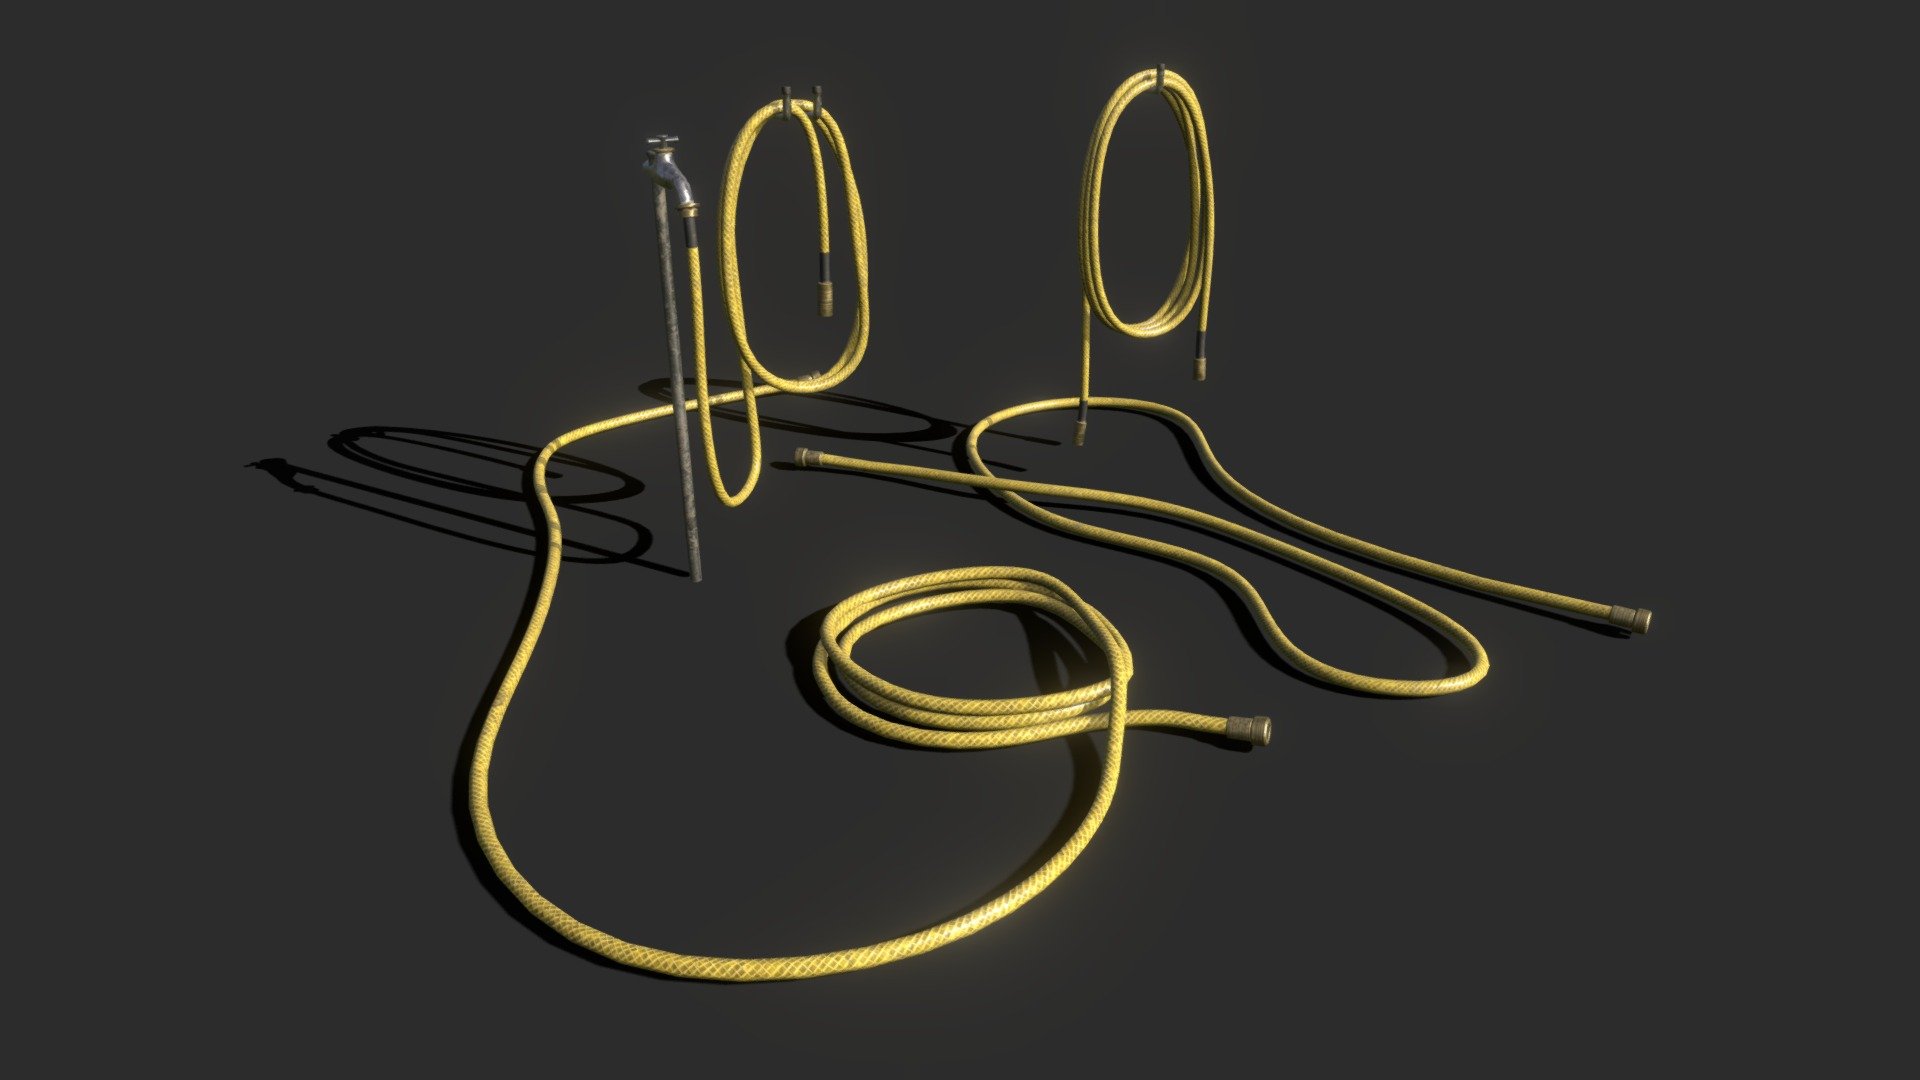 This garden hose models includes 4 LODs. This set includes 4 individual pipe assets. The 4 garden water tube equipments are ready for game and available in lowpoly and PBR ready. Also, the pack includes 4 color variations : Green, Yellow, Brown &amp; White.

This AAA game asset of flexible pipes will embellish you scene and add more details which can help the gameplay and the game-design.

Low-poly model &amp; Blender native 2.93

SPECIFICATIONS




Objects : 4

Polygons : 4212

Subdivision ready : No

Render engine : Eevee (Cycles ready)

GAME SPECS




LODs : Yes (inside FBX for Unity &amp; Unreal)

Numbers of LODs : 4

Collider : No

Lightmap UV : No

EXPORTED FORMATS




FBX

Collada

OBJ

TEXTURES




Materials in scene : 1

Textures sizes : 4K

Textures types : Base Color, Metallic, Roughness, Normal (DirectX &amp; OpenGL), Heigh &amp; AO (also Unity &amp; Unreal ARM workflow maps)

Textures format : PNG

GENERAL

Real scale : Yes
Scene objects are organized by groups - Water Garden Hose - Buy Royalty Free 3D model by KangaroOz 3D (@KangaroOz-3D) 3d model